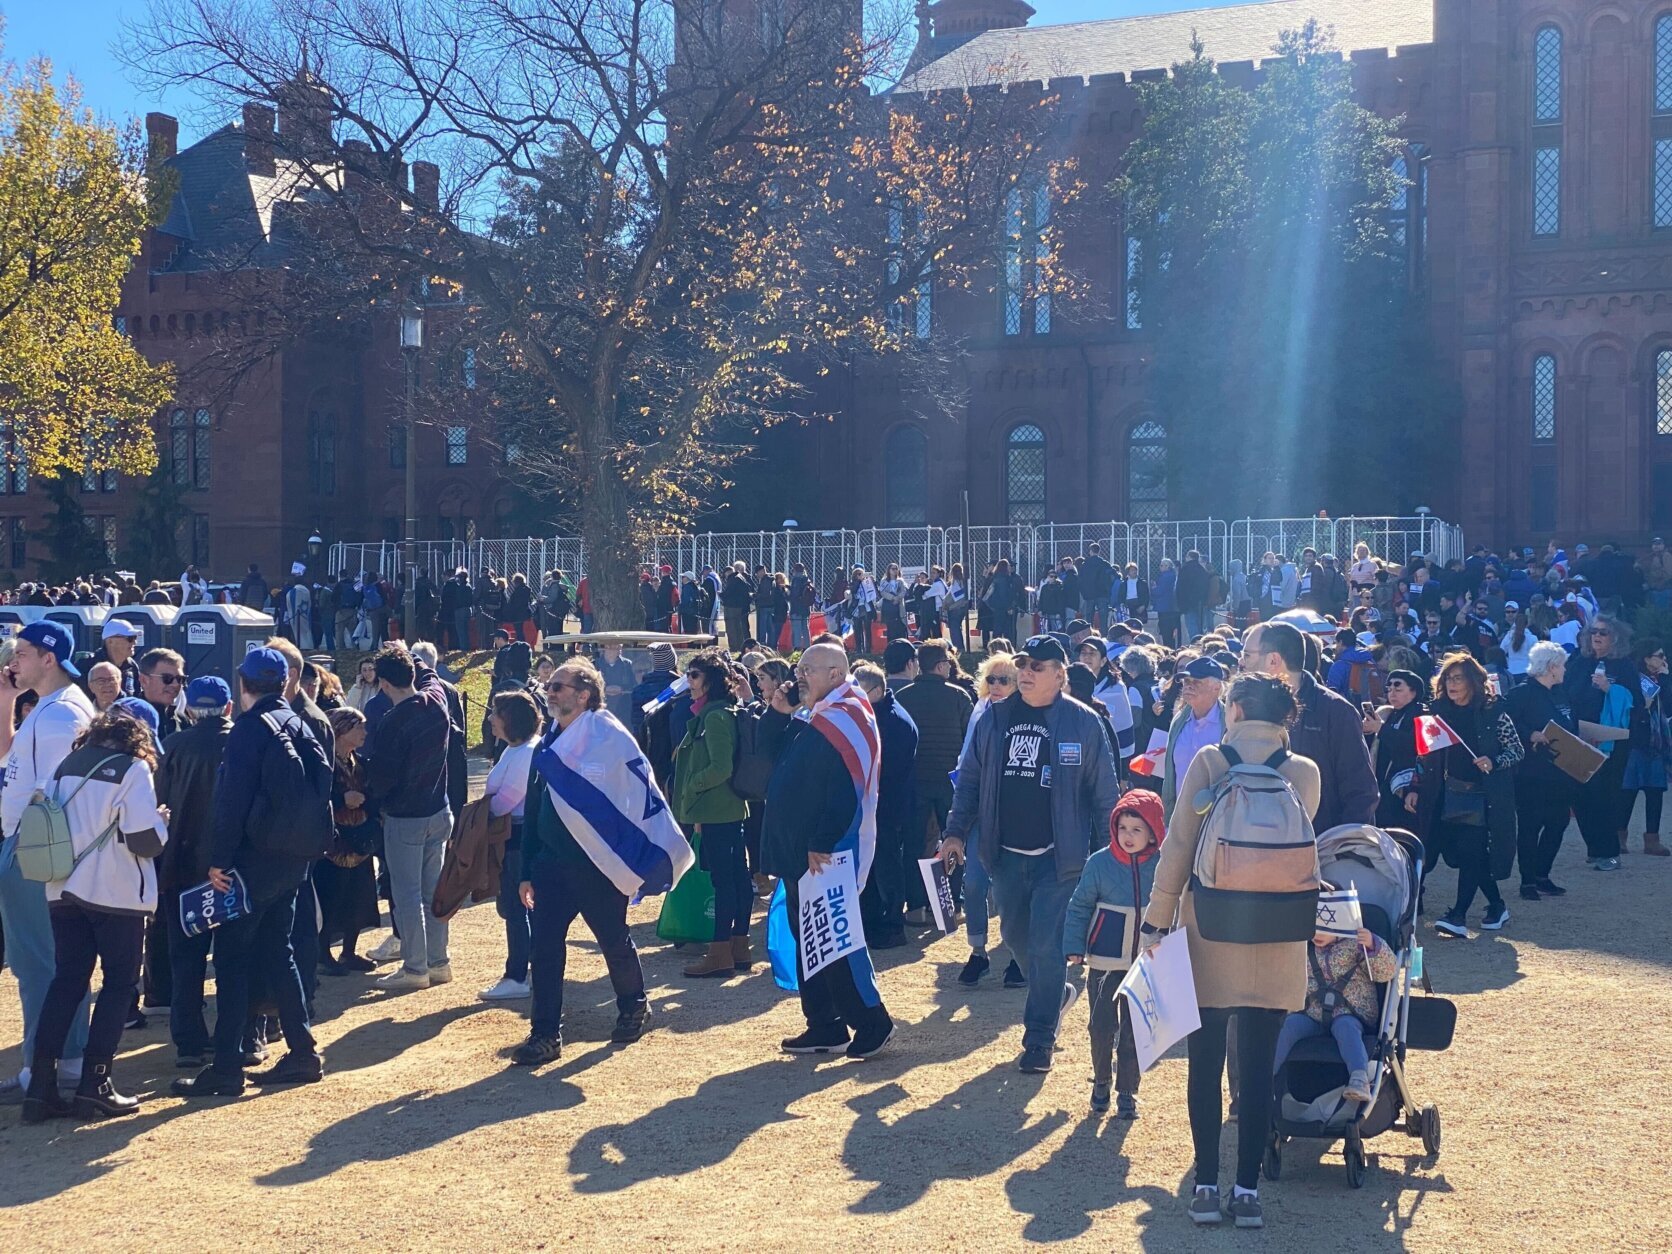 A crowd of people gather in support of Israel